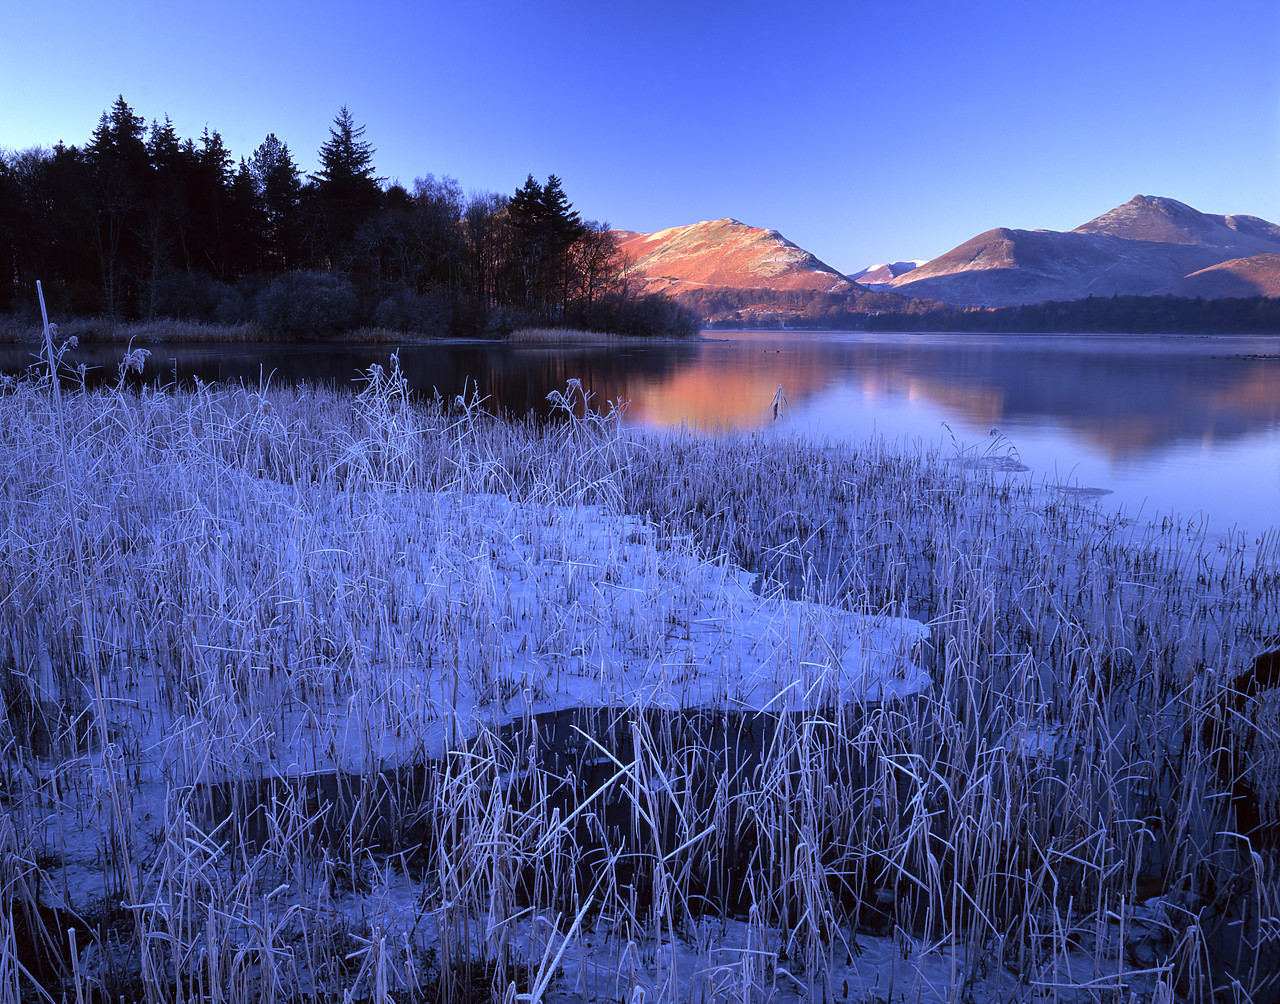 #892579-1 - Frost on Derwent Water, Lake District National Park, Cumbria, England